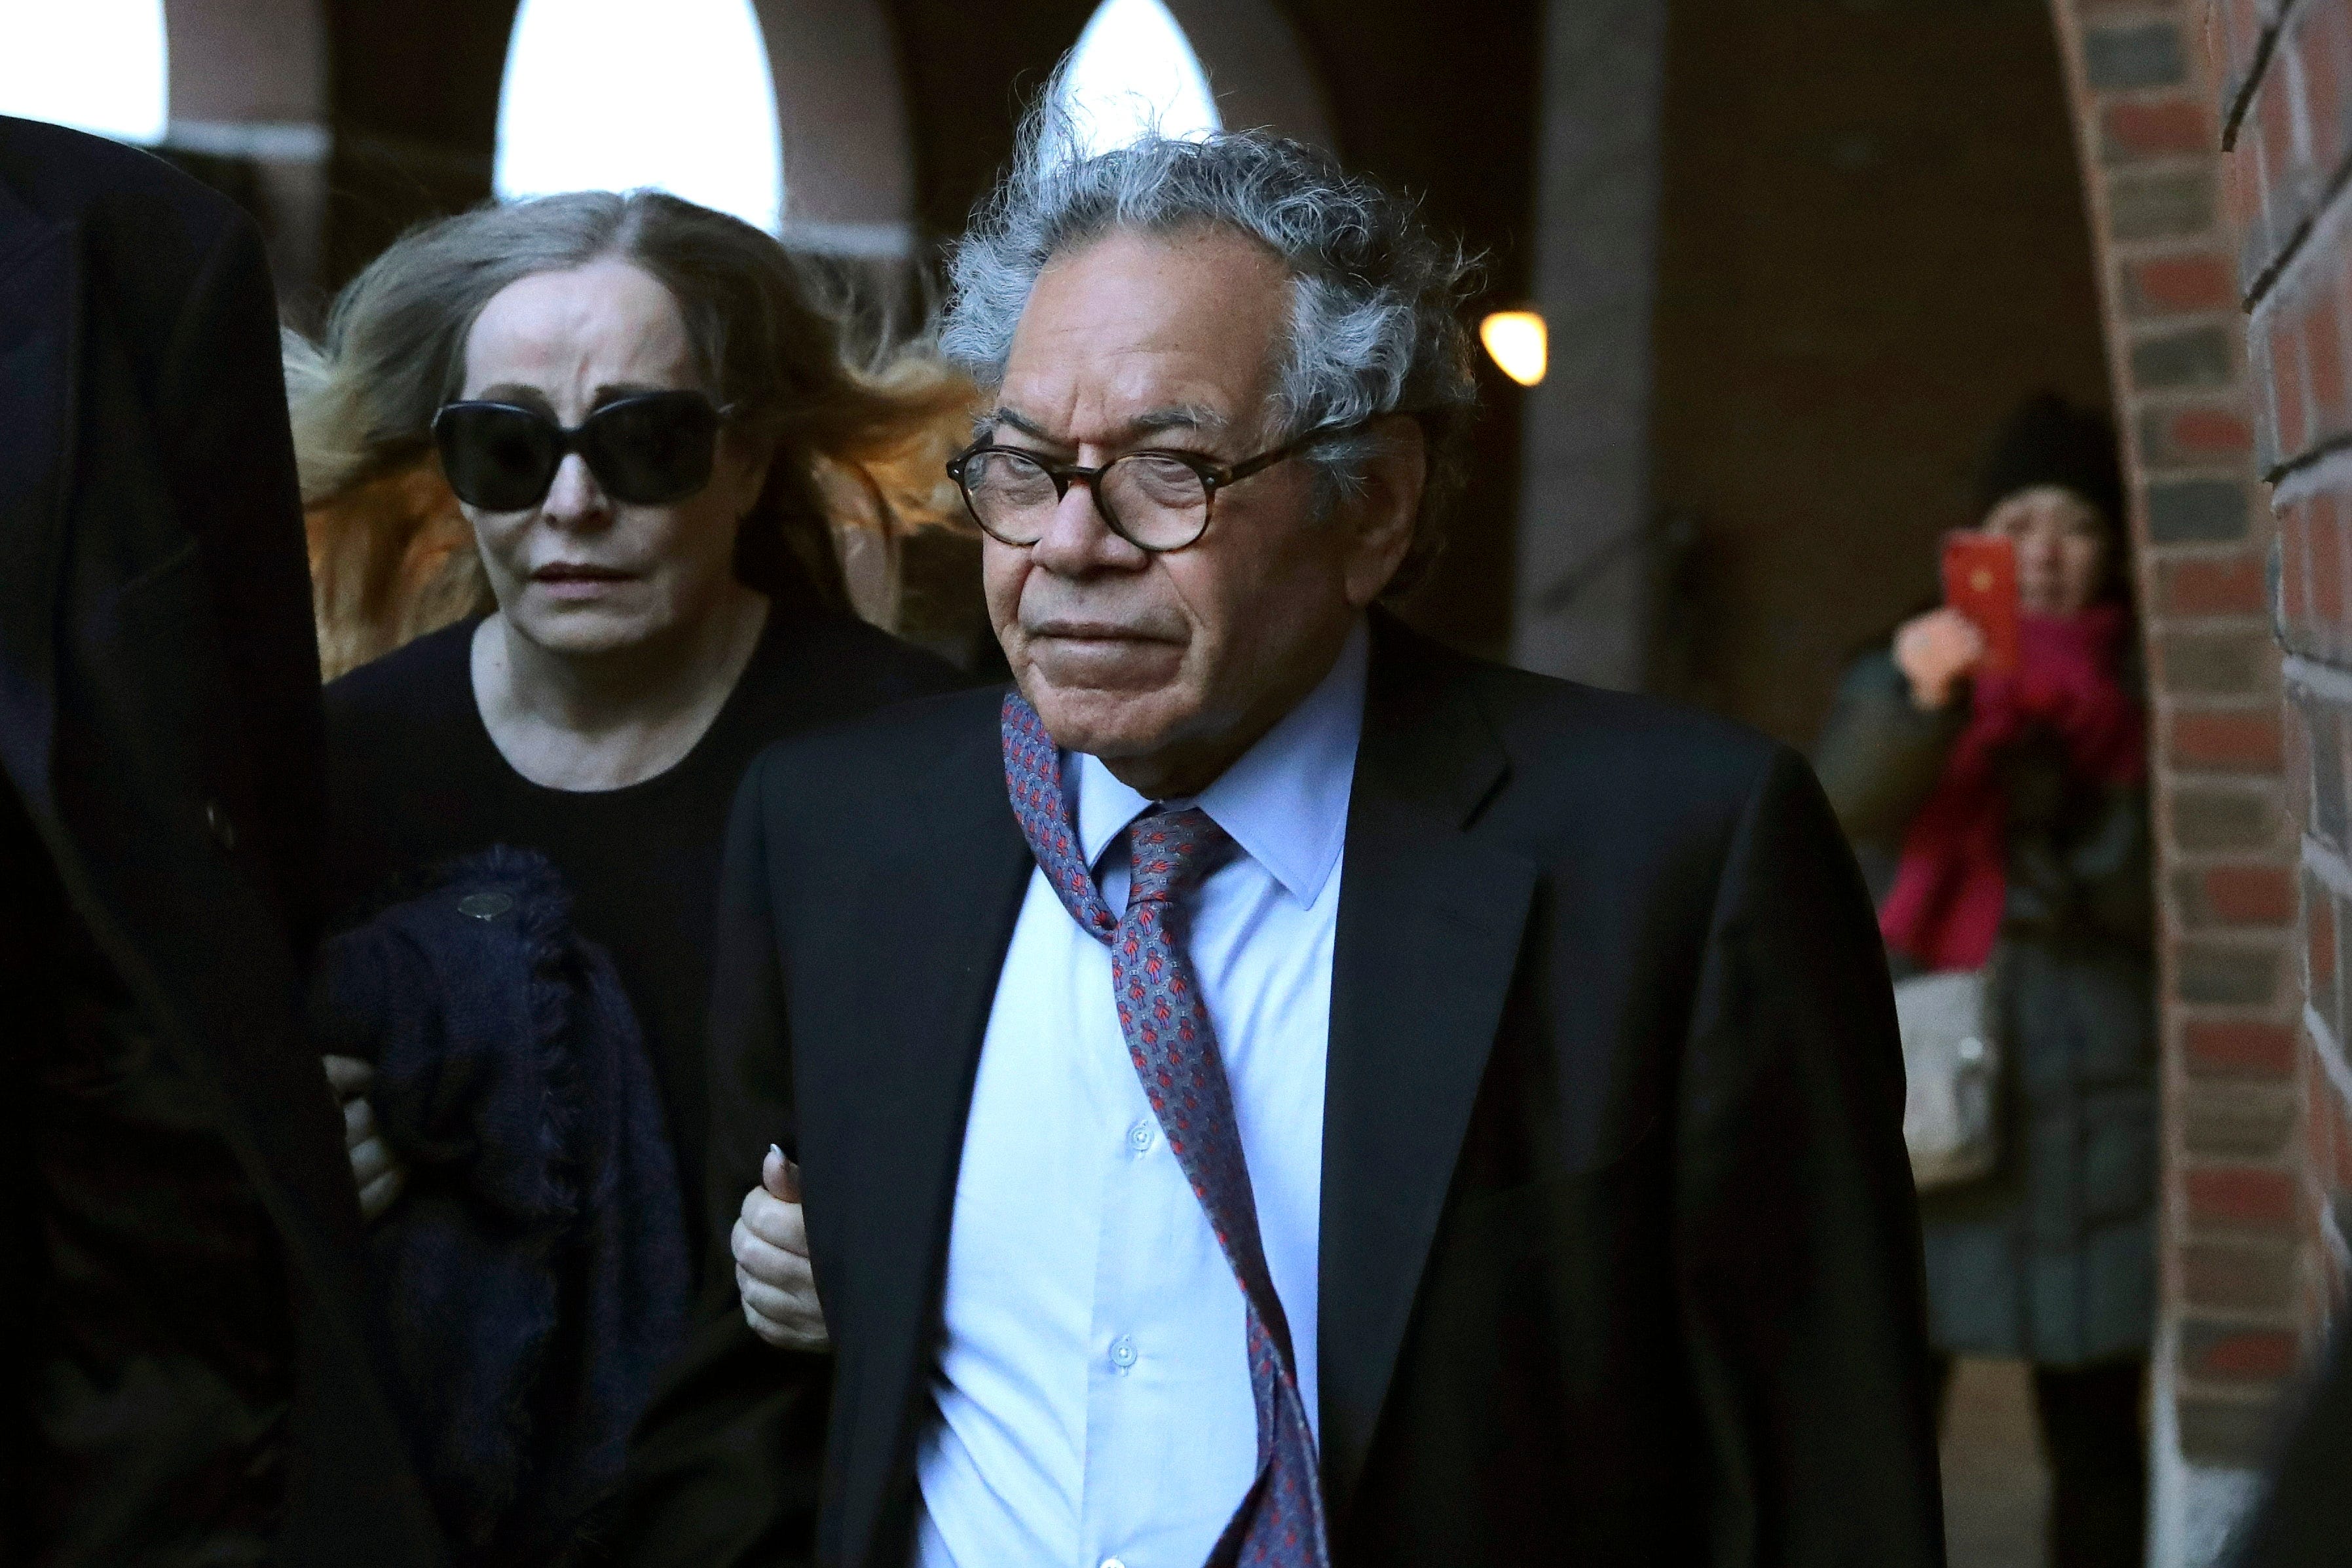 Insys Therapeutics founder John Kapoor to serve 66 months in prison for